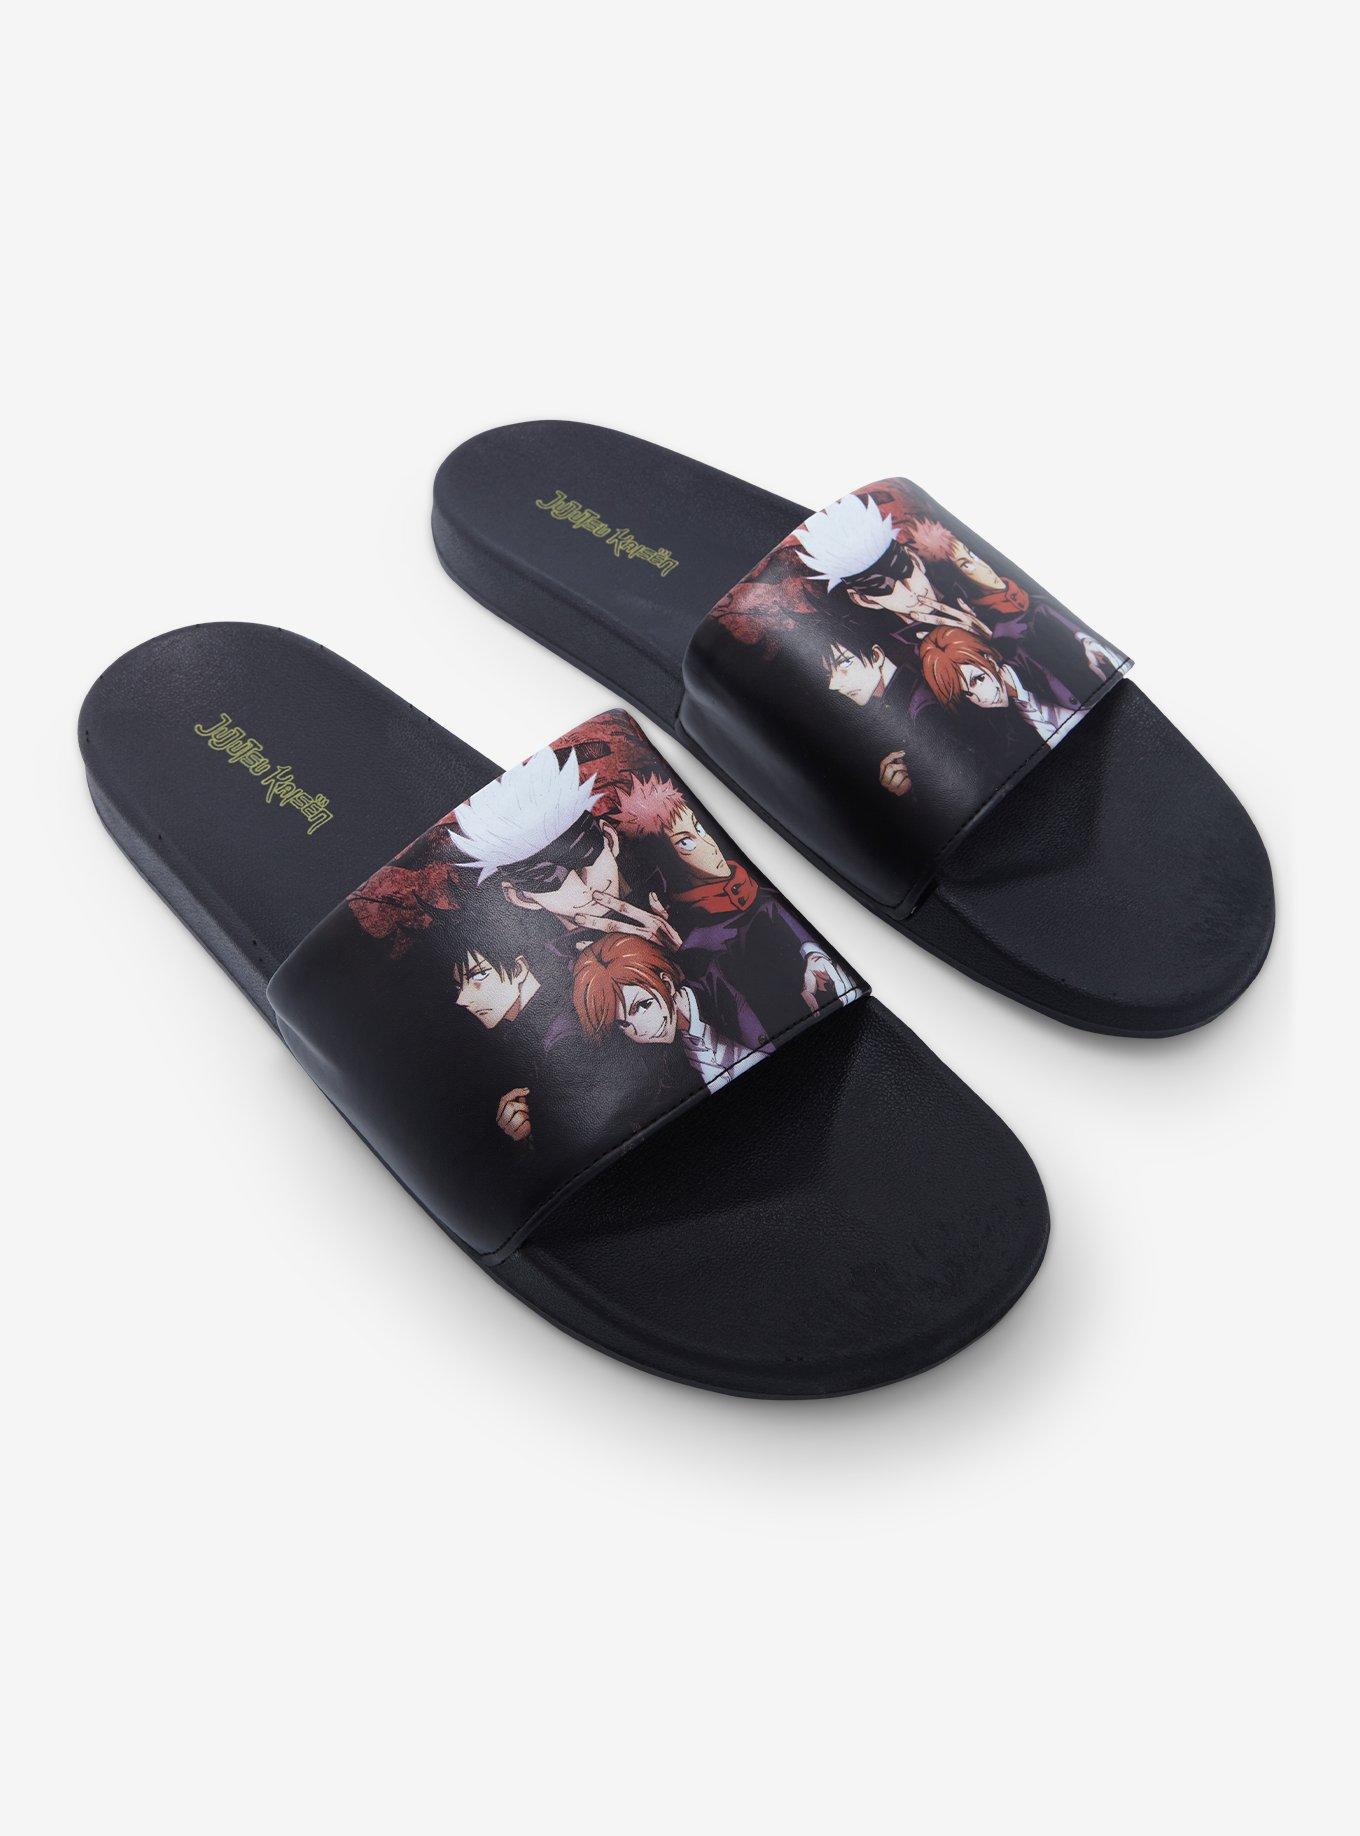 Black Cover Pam Slippers  Slippers cozy, Cool slides, Slippers